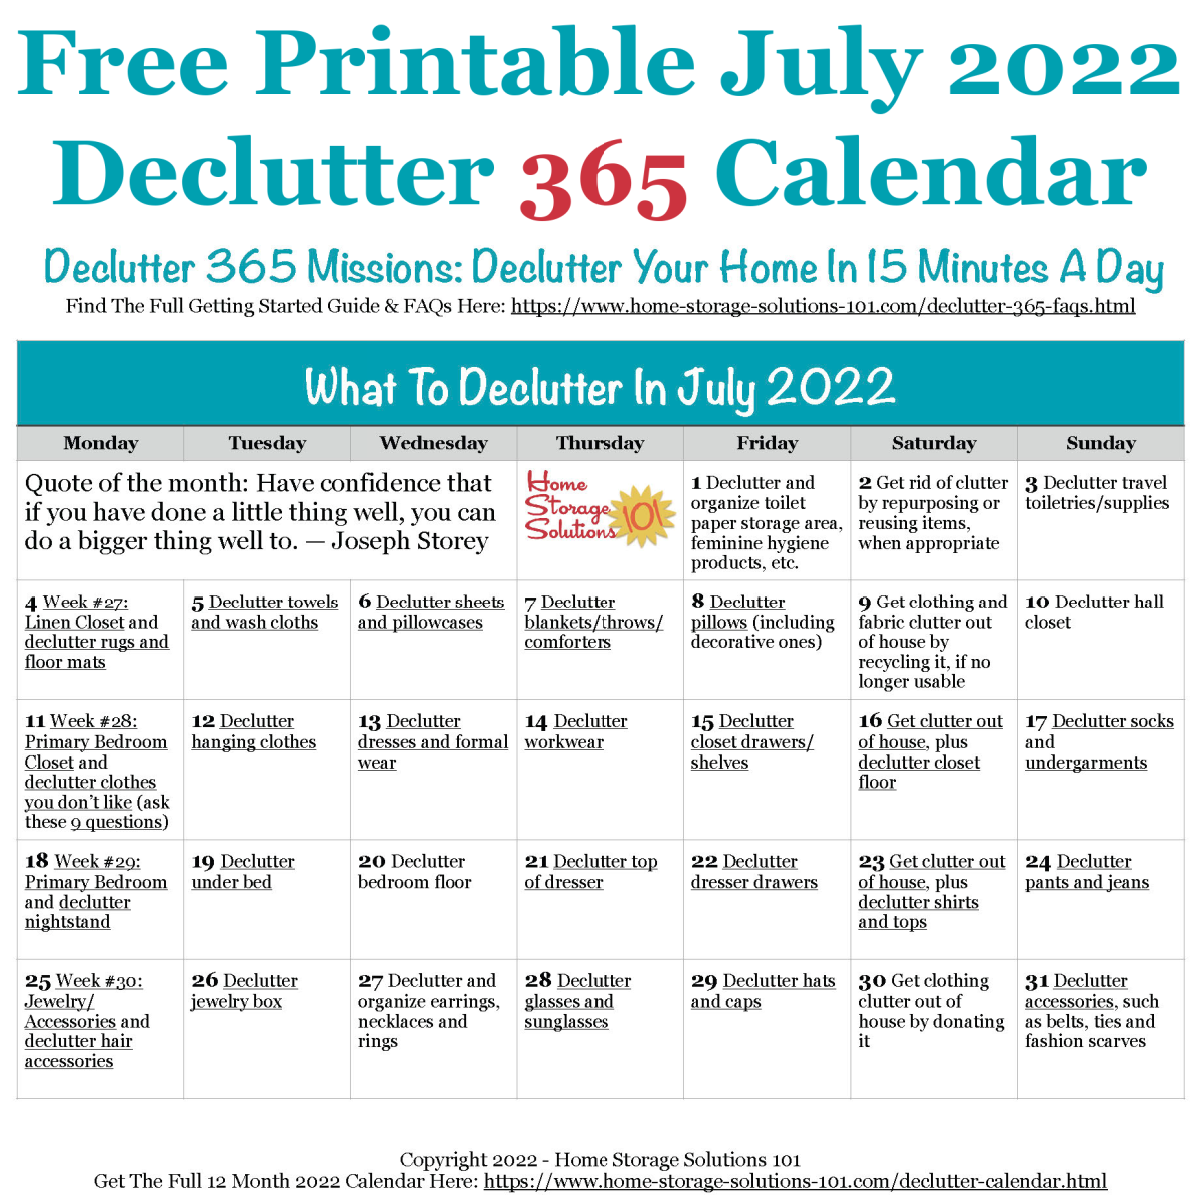 Free printable July 2022 #decluttering calendar with daily 15 minute missions. Follow the entire #Declutter365 plan provided by Home Storage Solutions 101 to #declutter your whole house in a year.